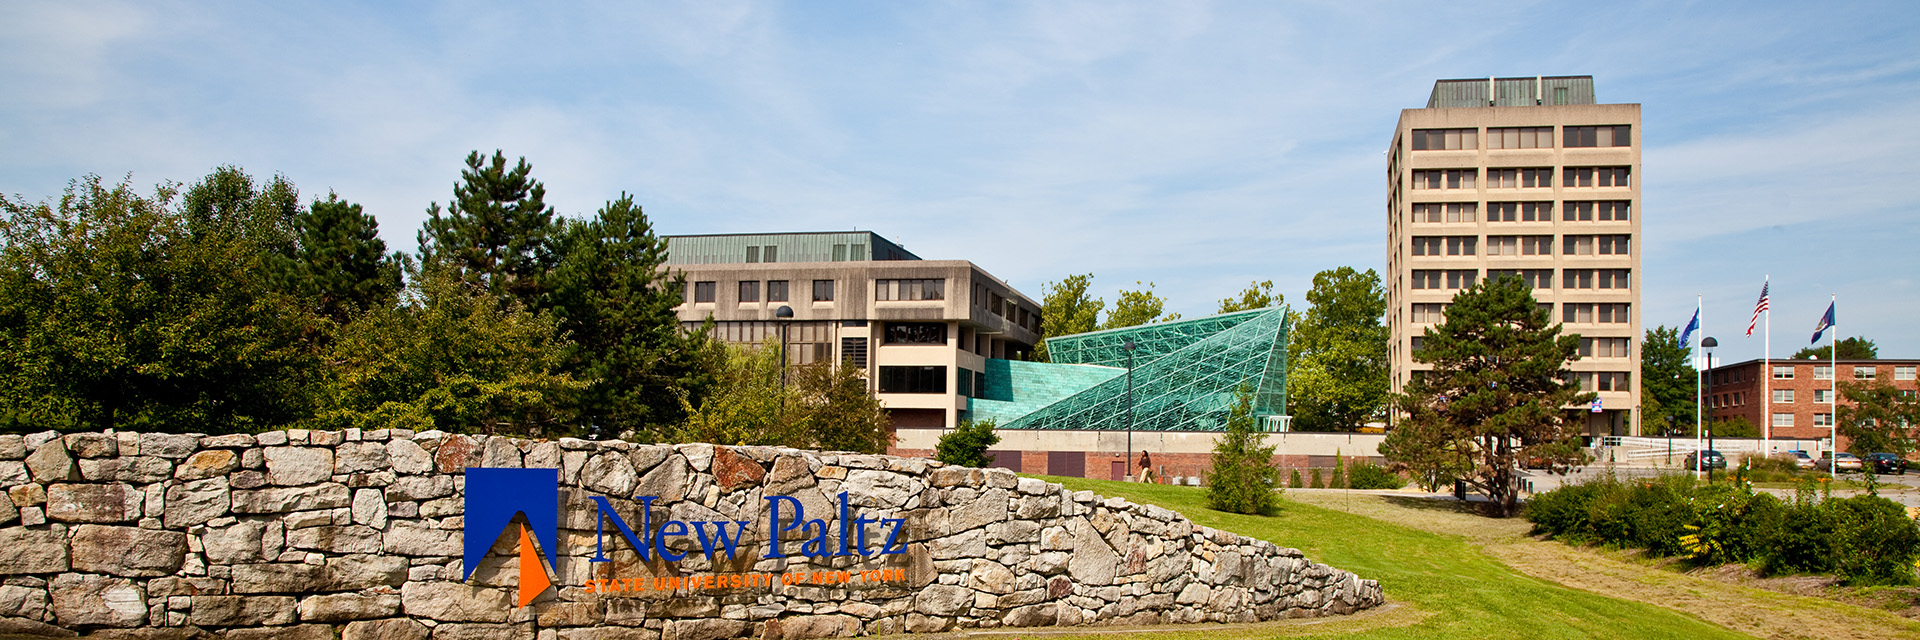 New Paltz College - Gay And Sex